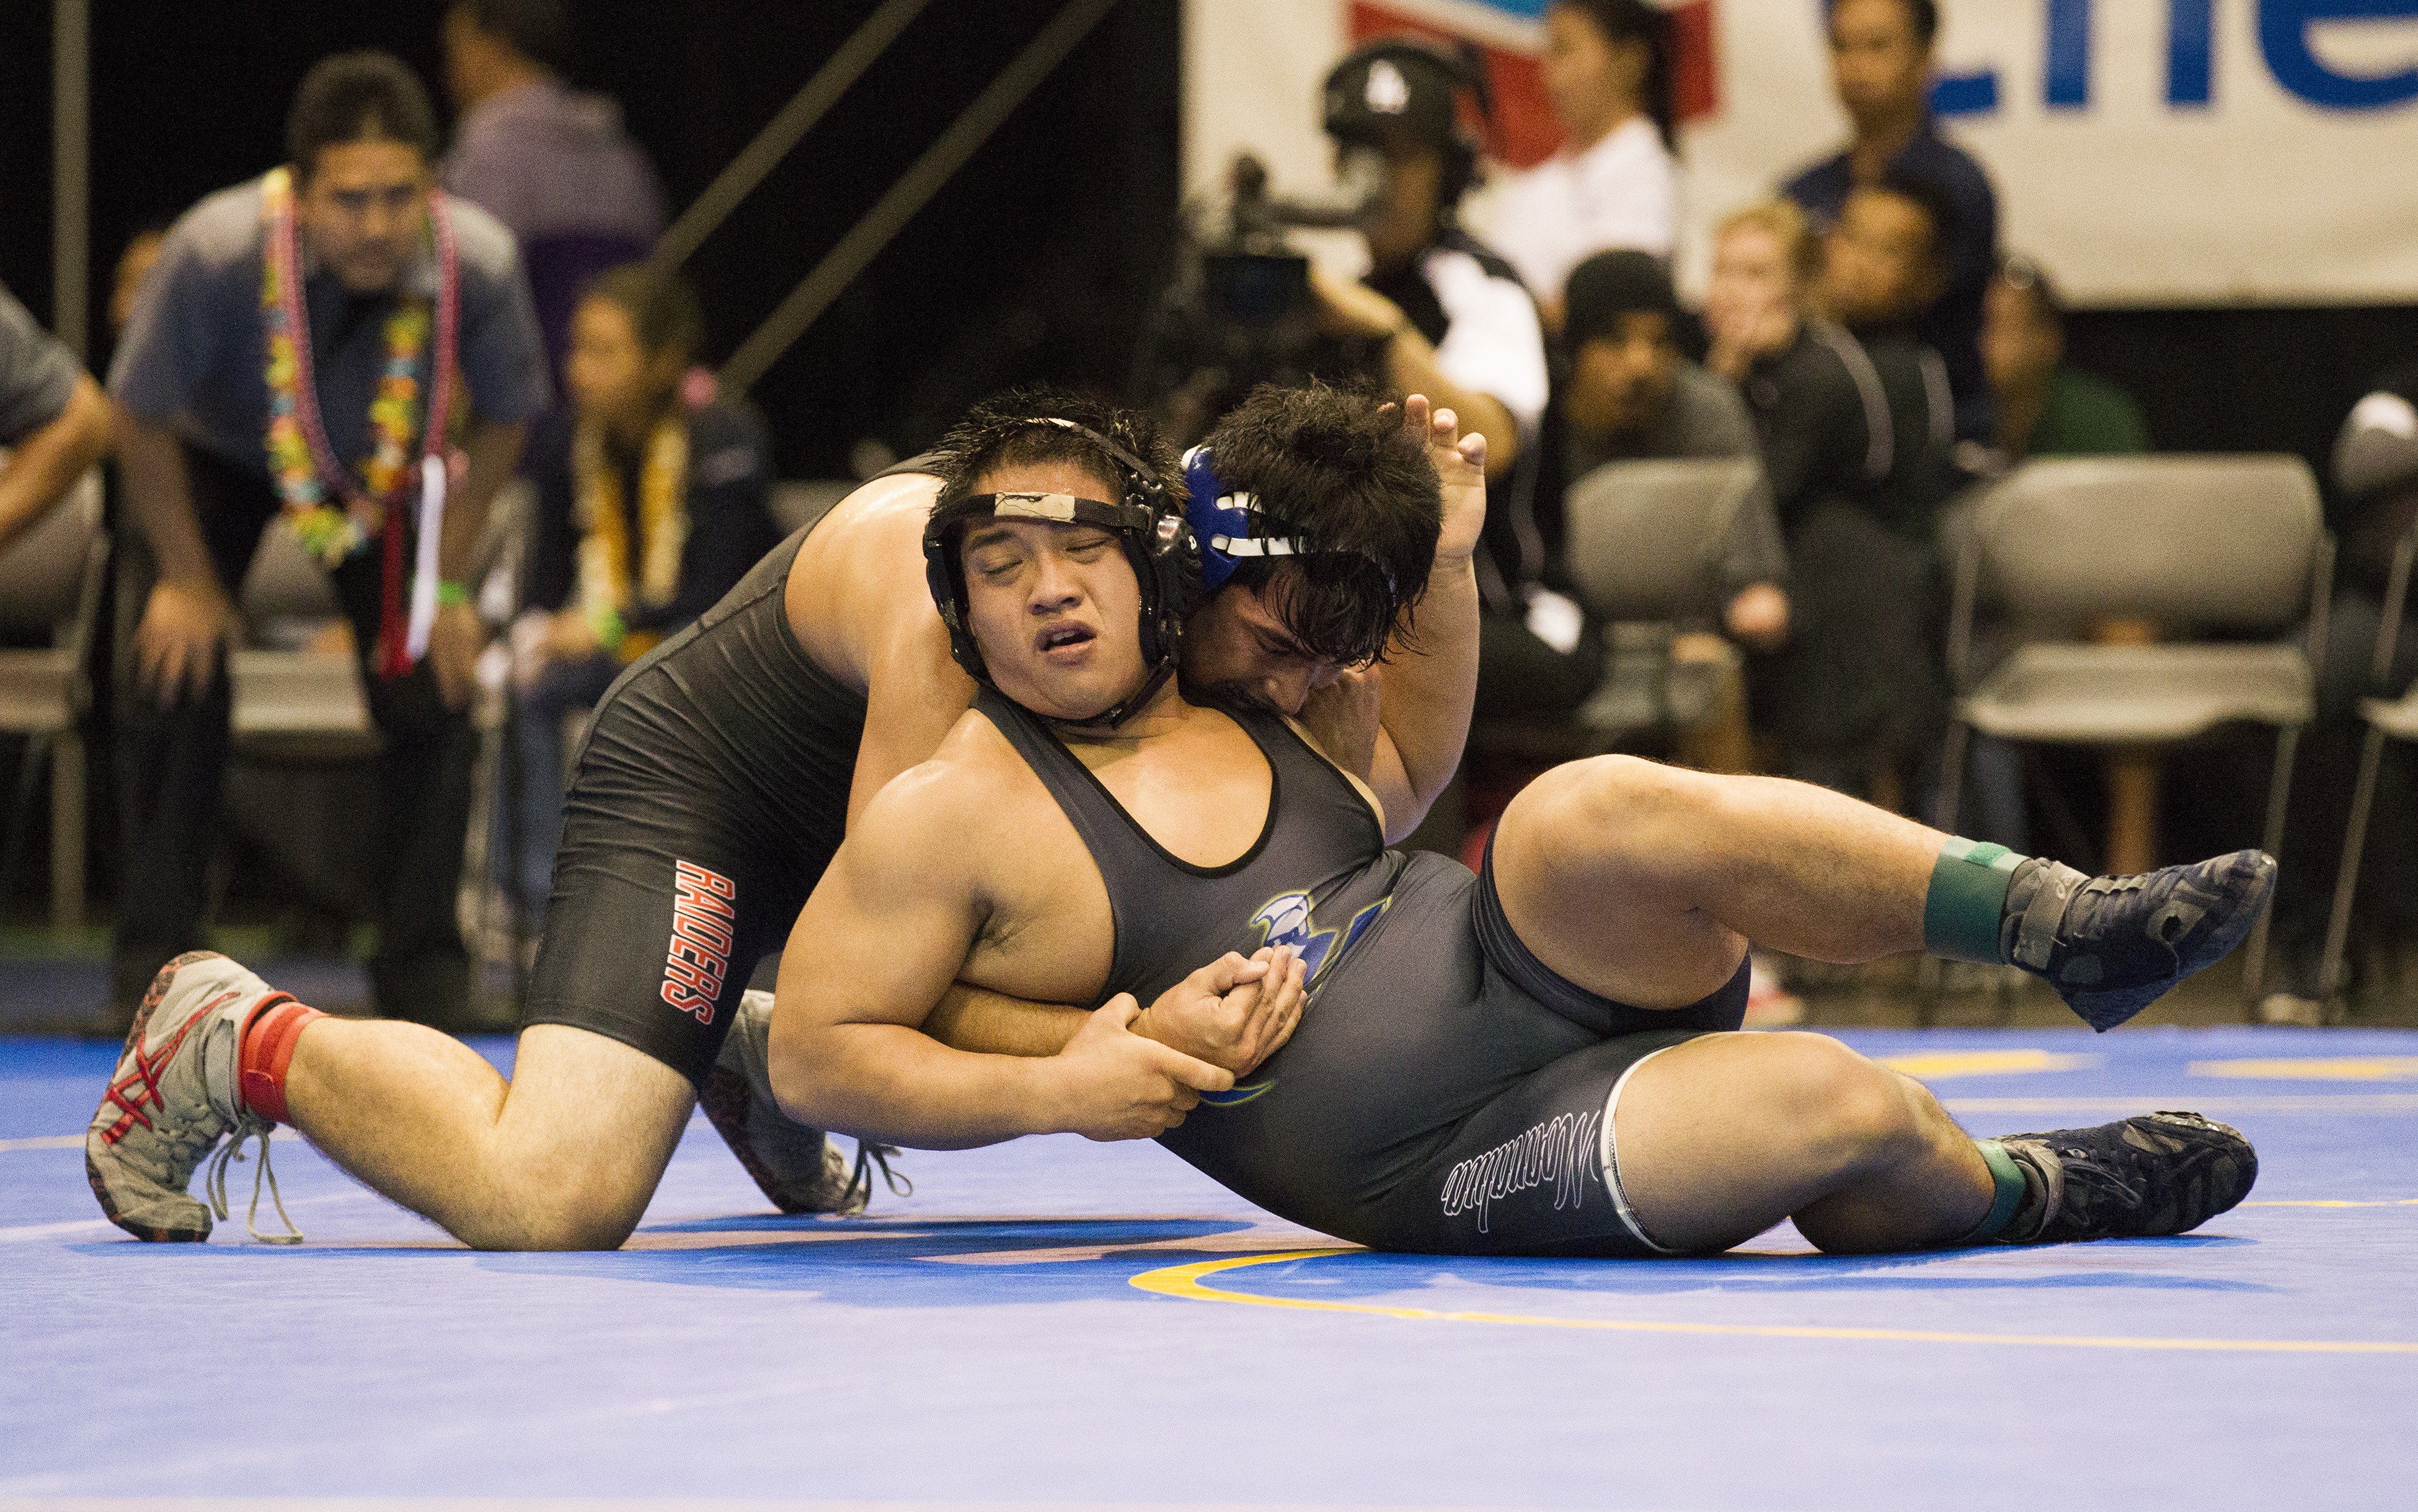 HHSAA Wrestling State Championship, Feb. 18